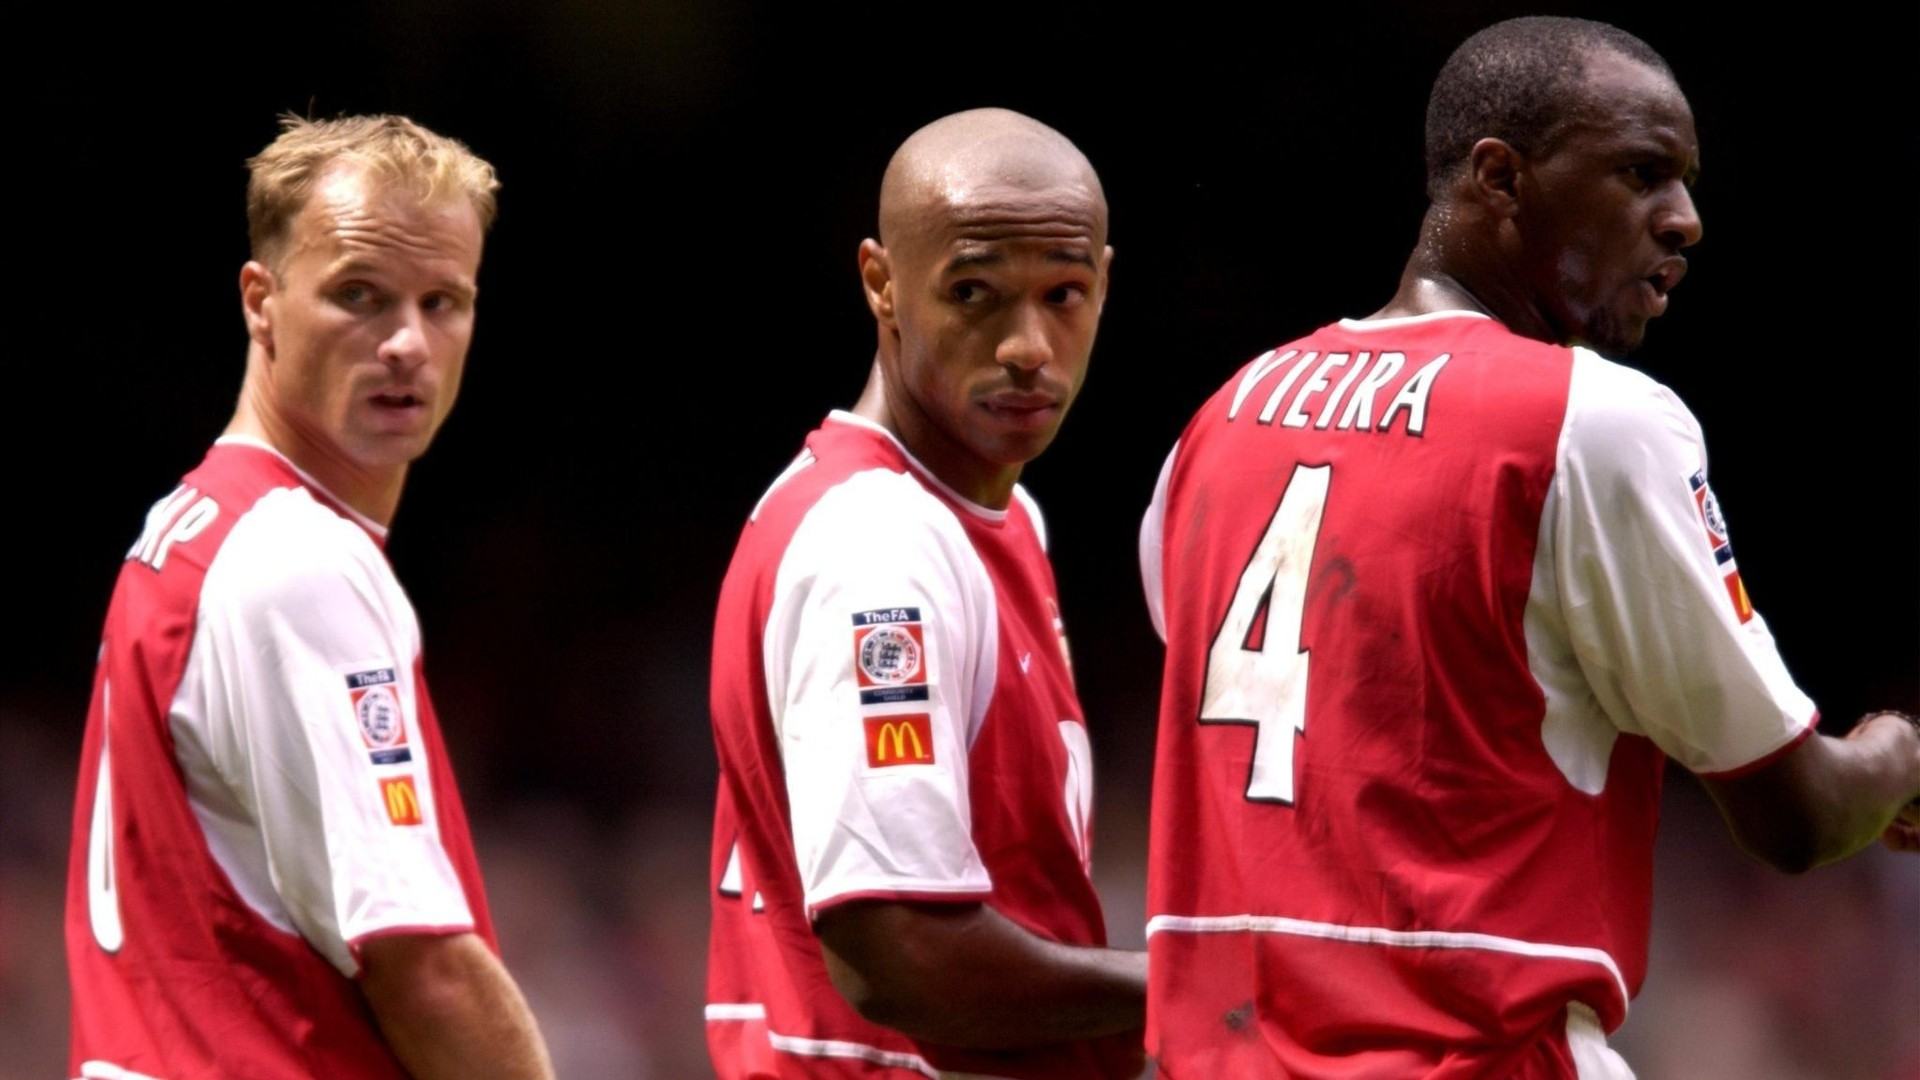 The Arsenal takeover bid is being driven by legends (from L-R): Dennis Bergkamp, Thierry Henry and Patrick Viera. [Image: Twitter]